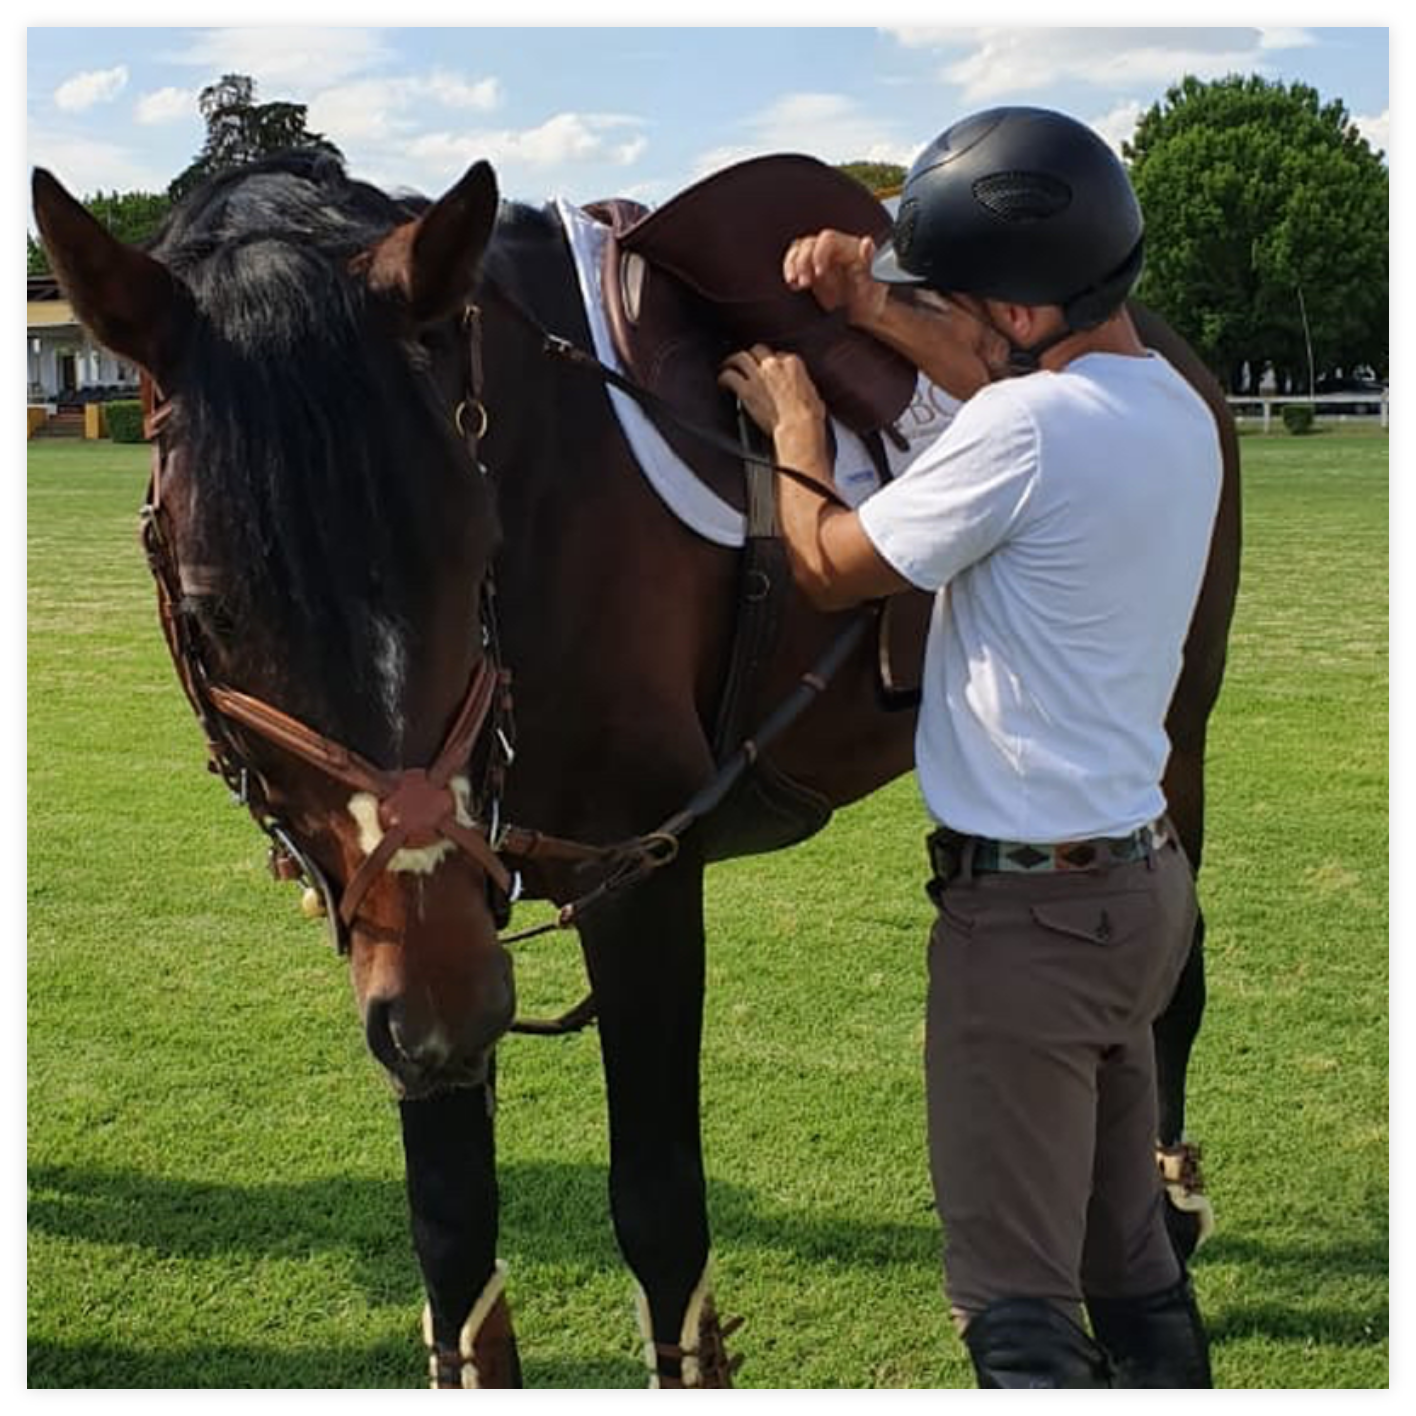 Contact a saddle fitter